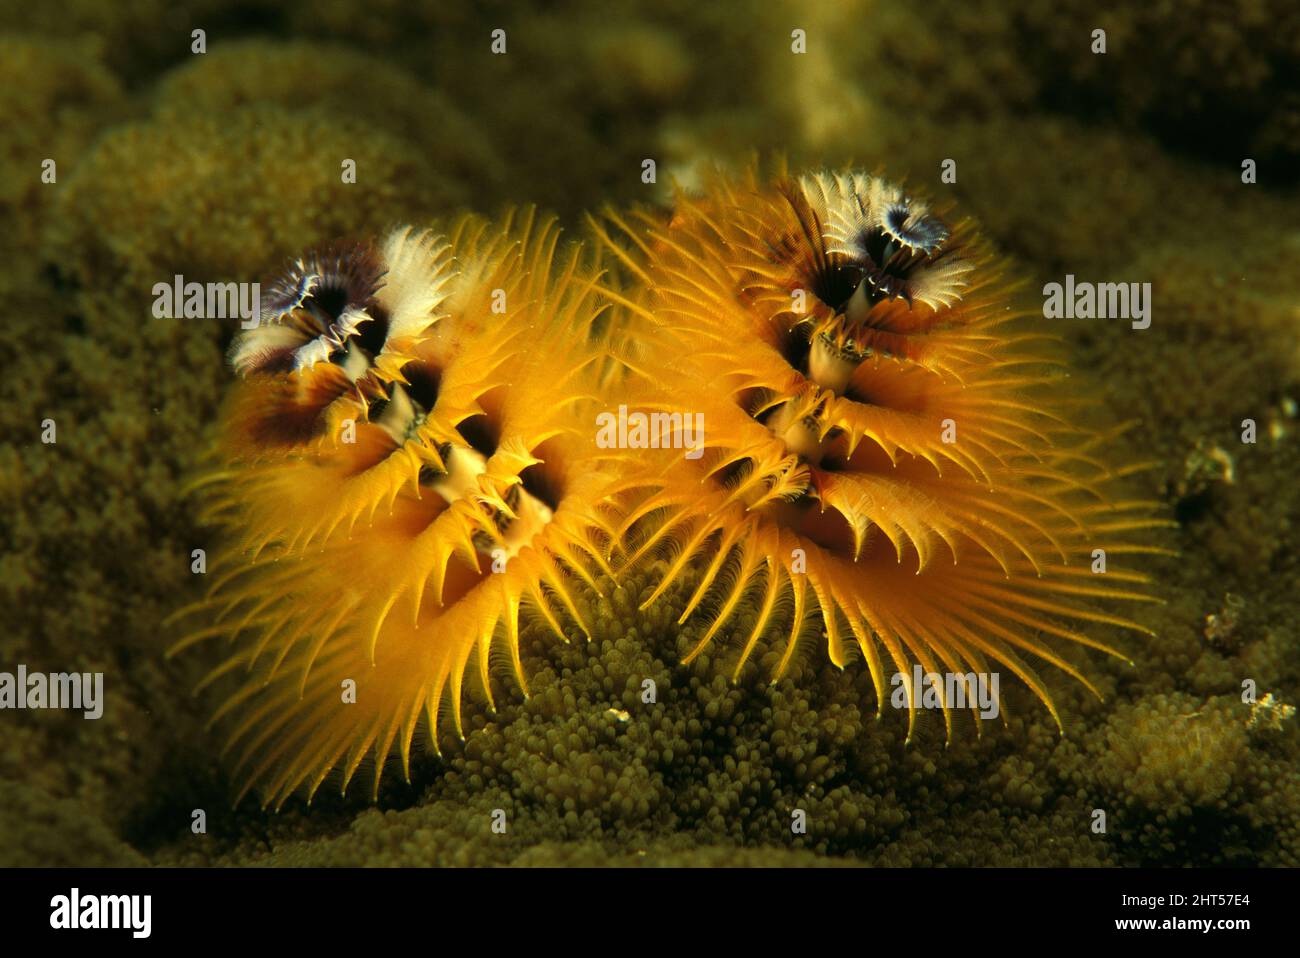 Christmas tree worms (Spirobranchus giganteus), showing the feathery radioles that direct prey trapped in them to be carried to the mouth, at top. Man Stock Photo